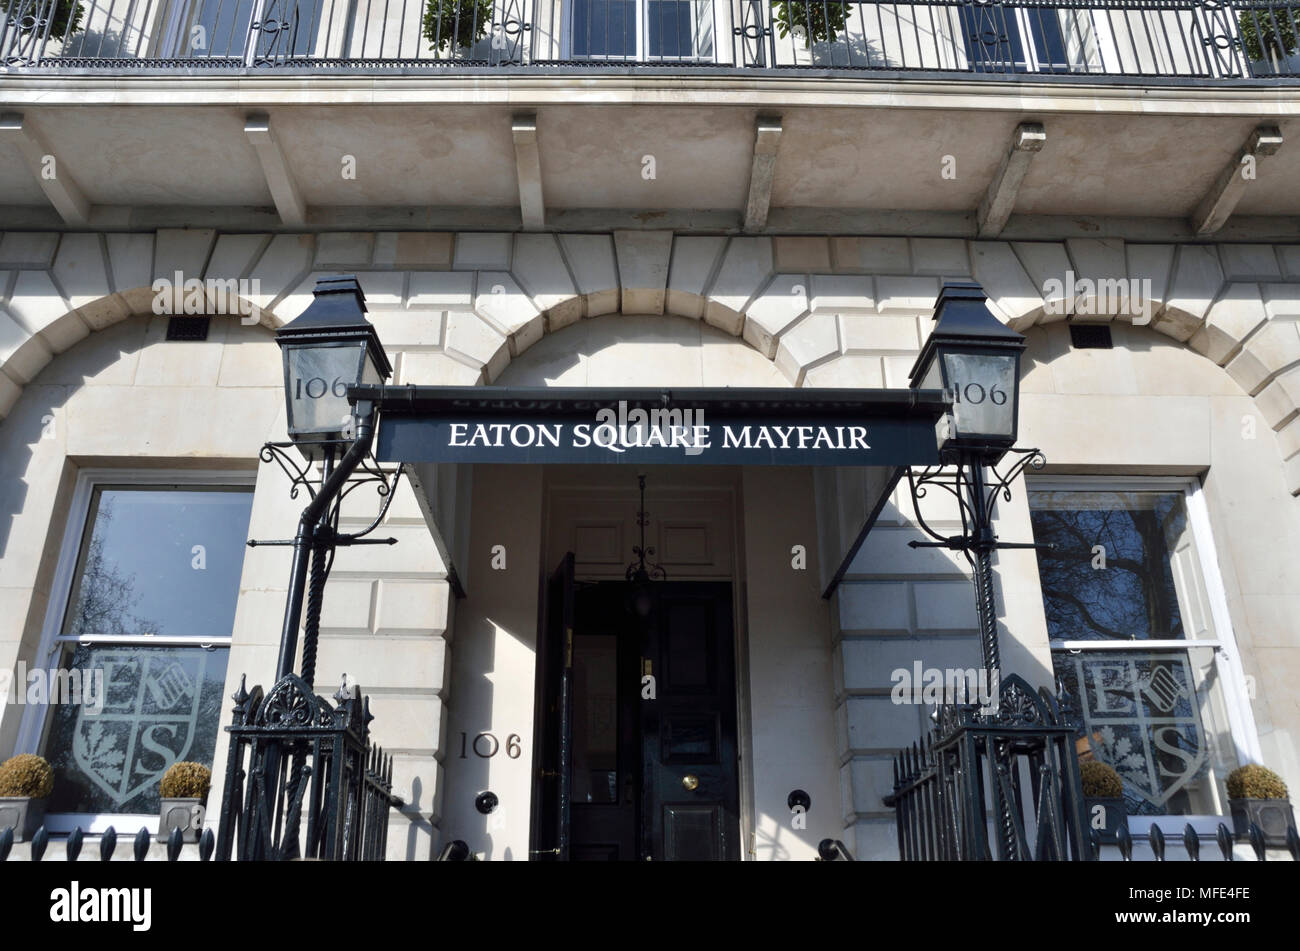 Eaton Square Mayfair Schule in Piccadilly, London, UK. Stockfoto